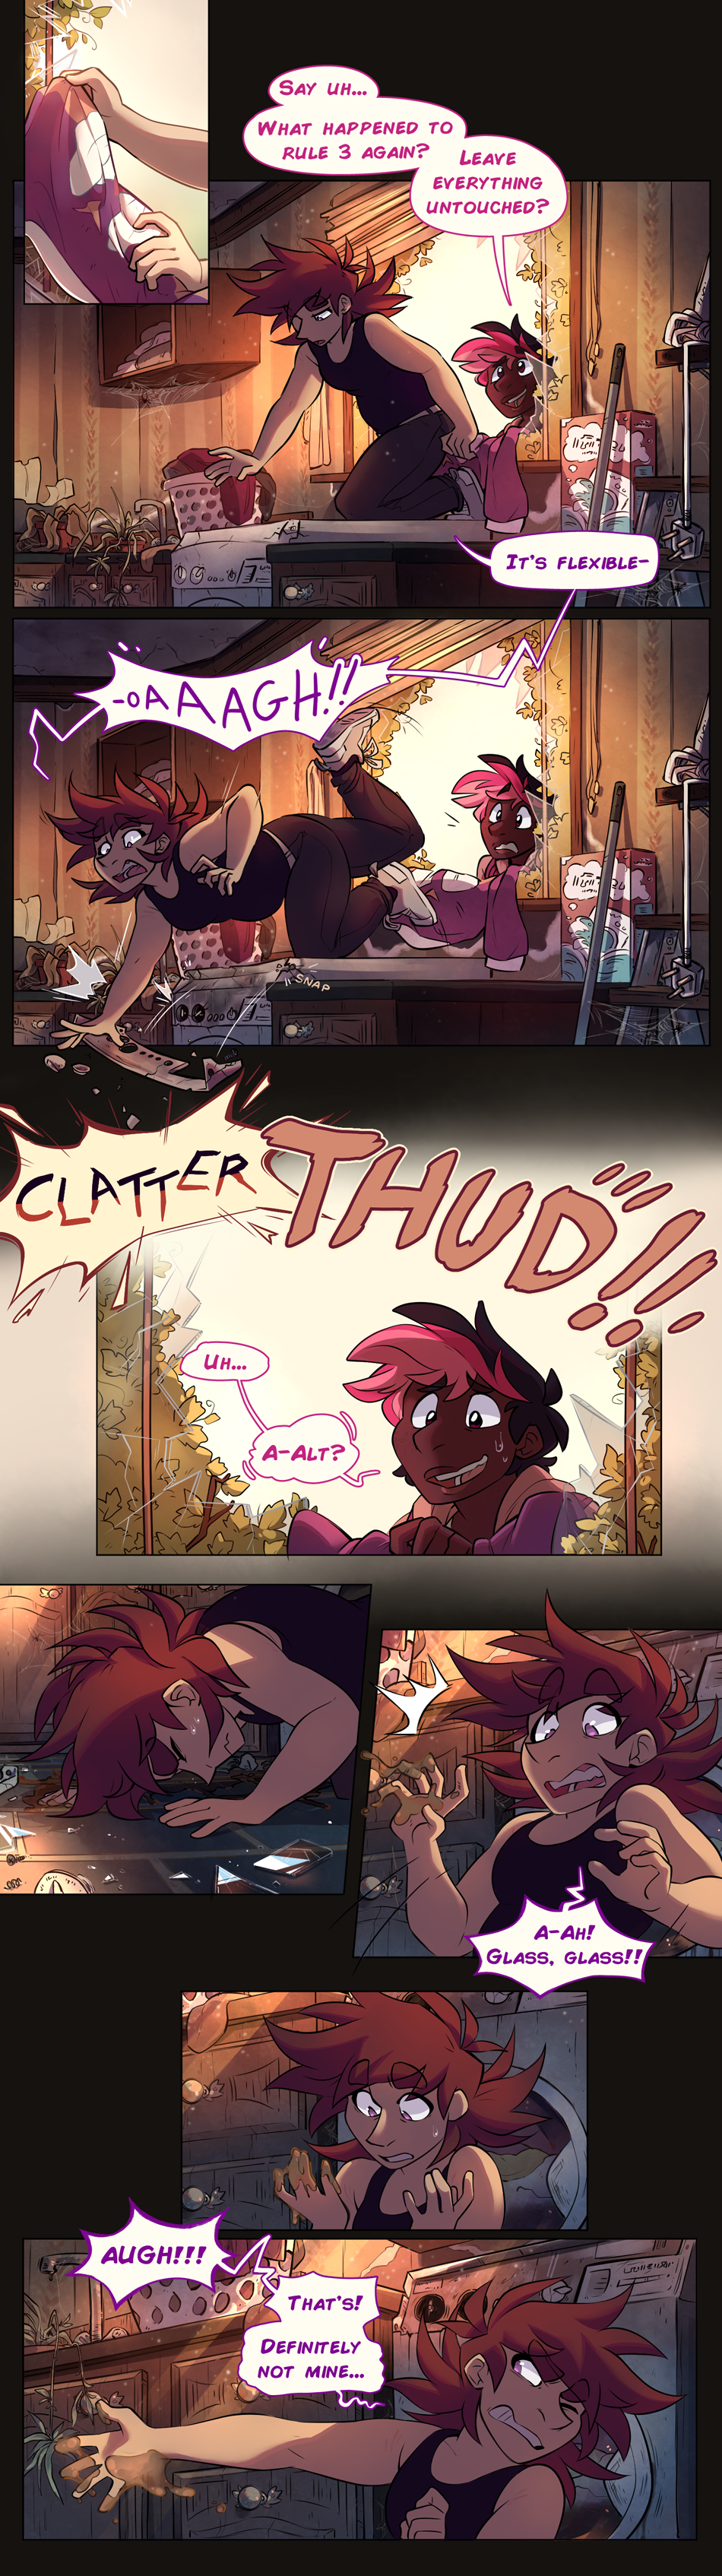 CH1_Page 7